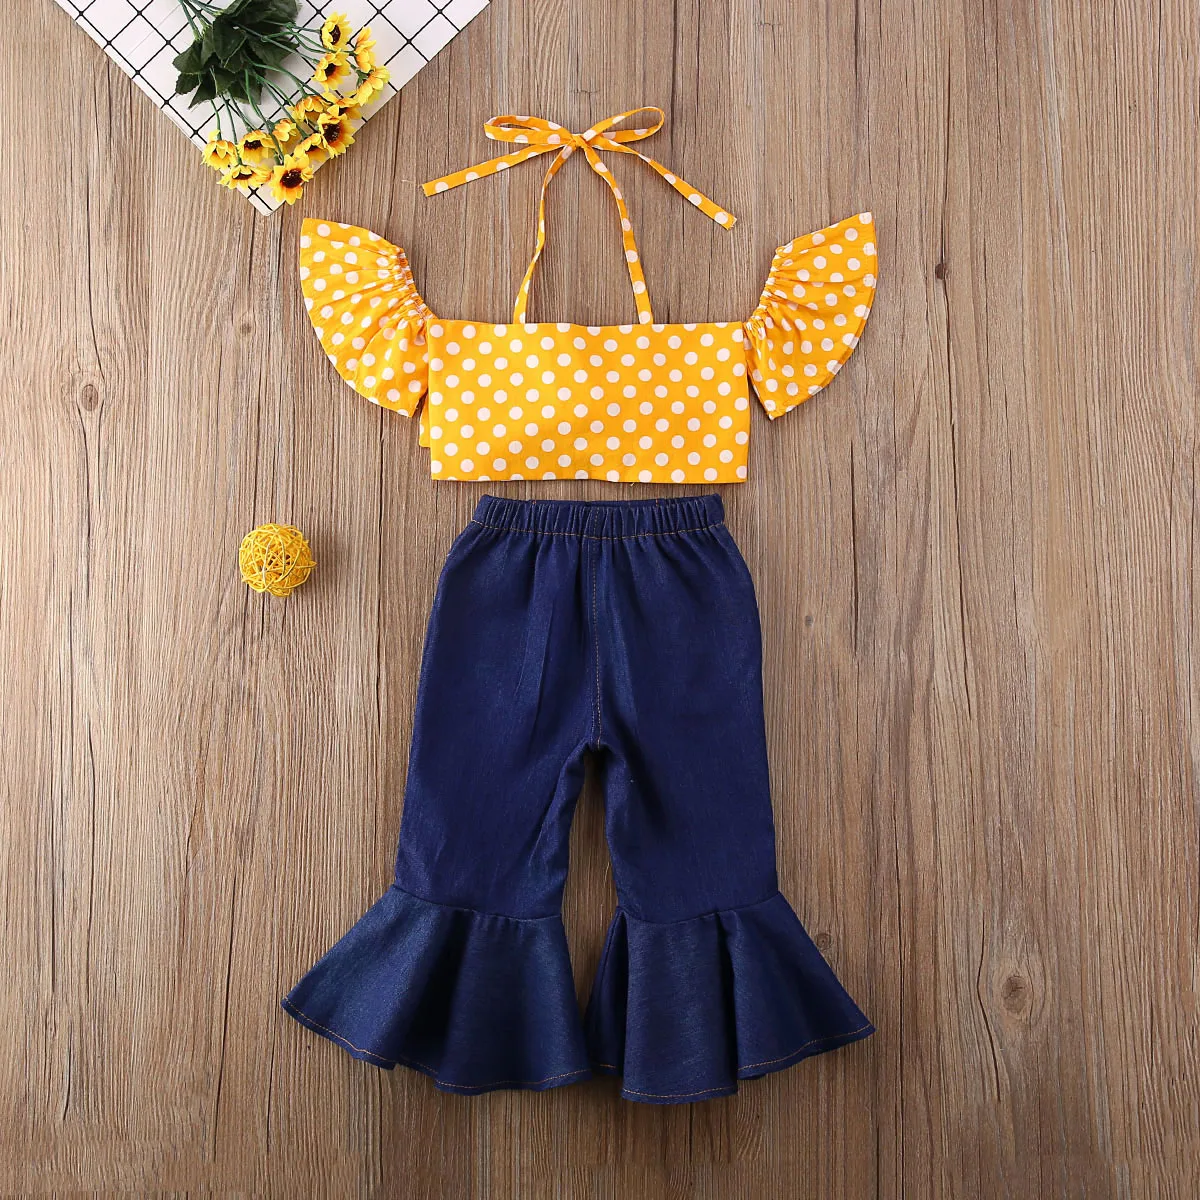 

Pudcoco Baby Girl Clothes Hot Sale Girls' Clothing Sets Kids Baby Clothes Toddler Polka Crop Tops T-shirt + Denim Flare Pants